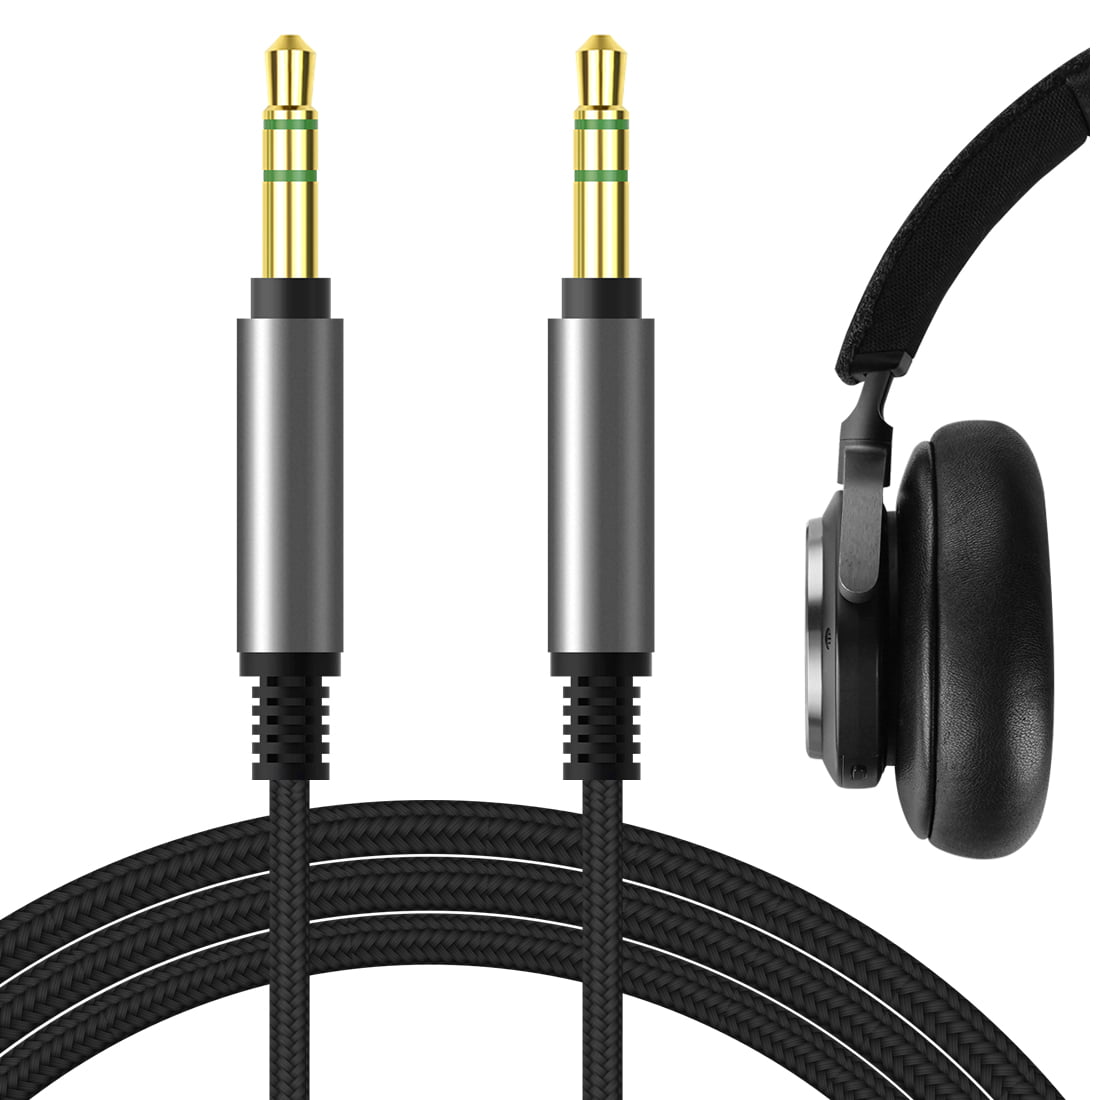 PX5 H9 3rd Gen H9i H8 Cable 3.5mm Aux Replacement Stereo Cord Bang & Olufsen H95 4 ft/1.2 m PX Geekria QuickFit Audio Cable Compatible with Bowers & Wilkins PX7 H8i 